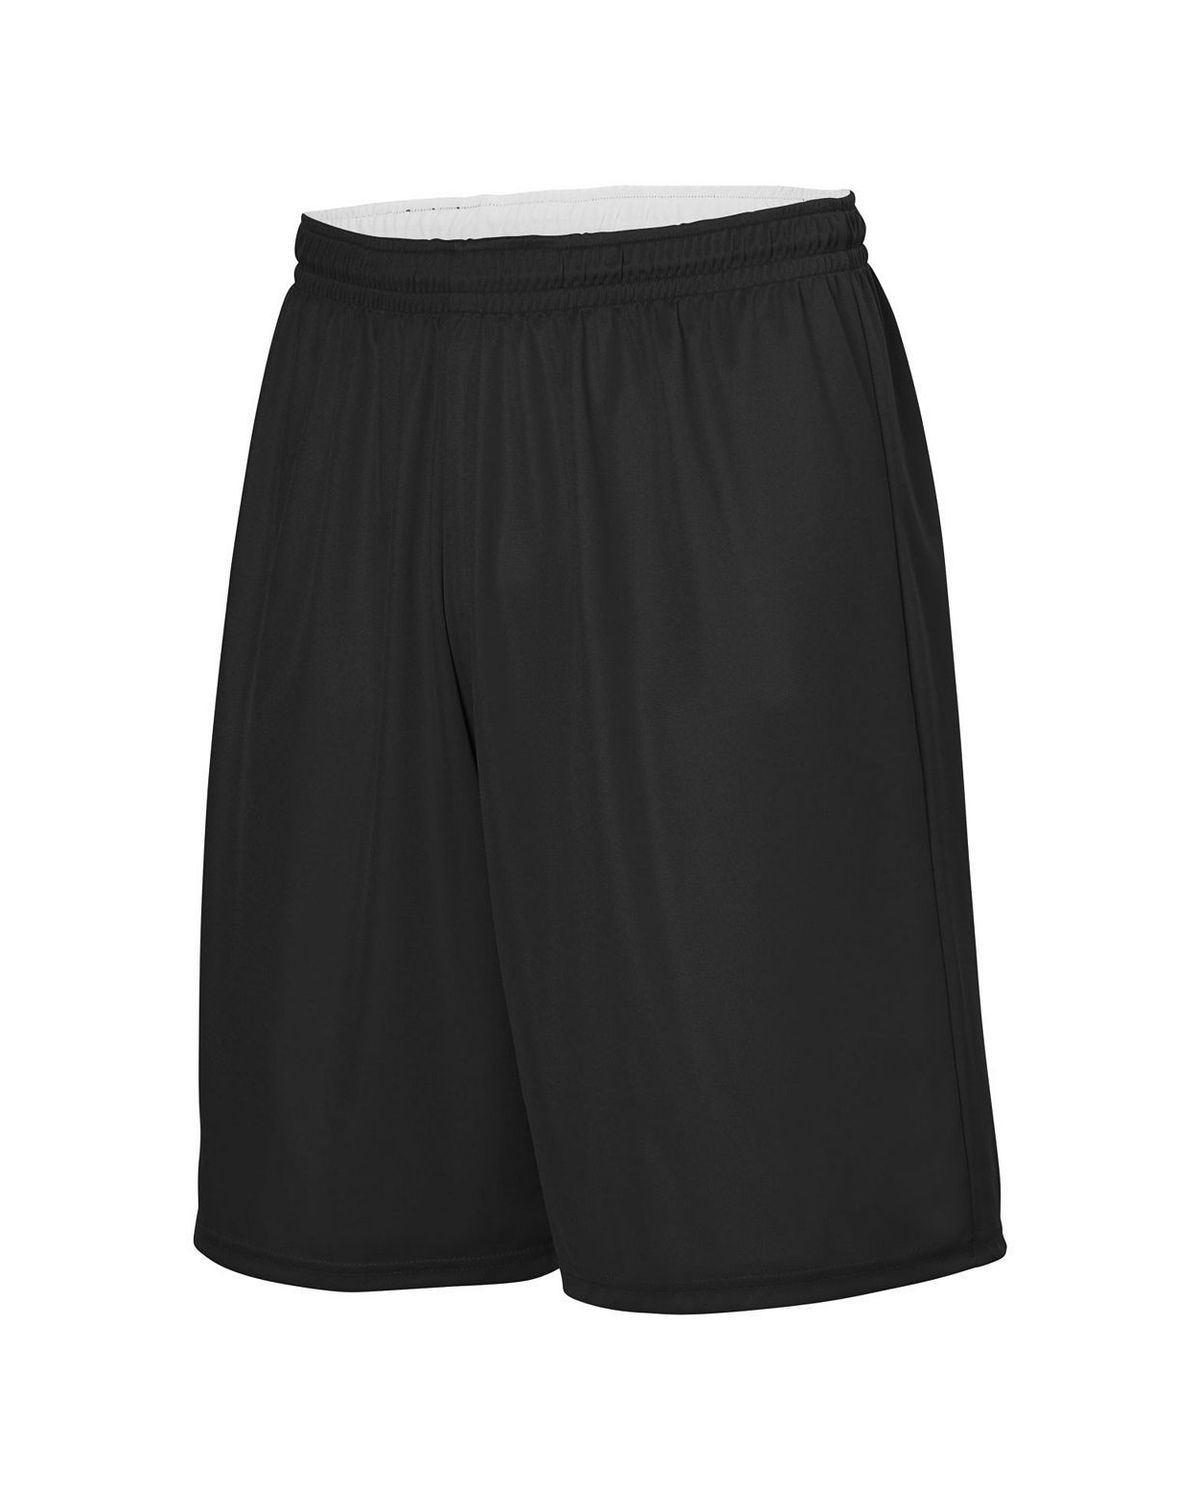 'Augusta 1407 Youth Reversible Wicking Short'